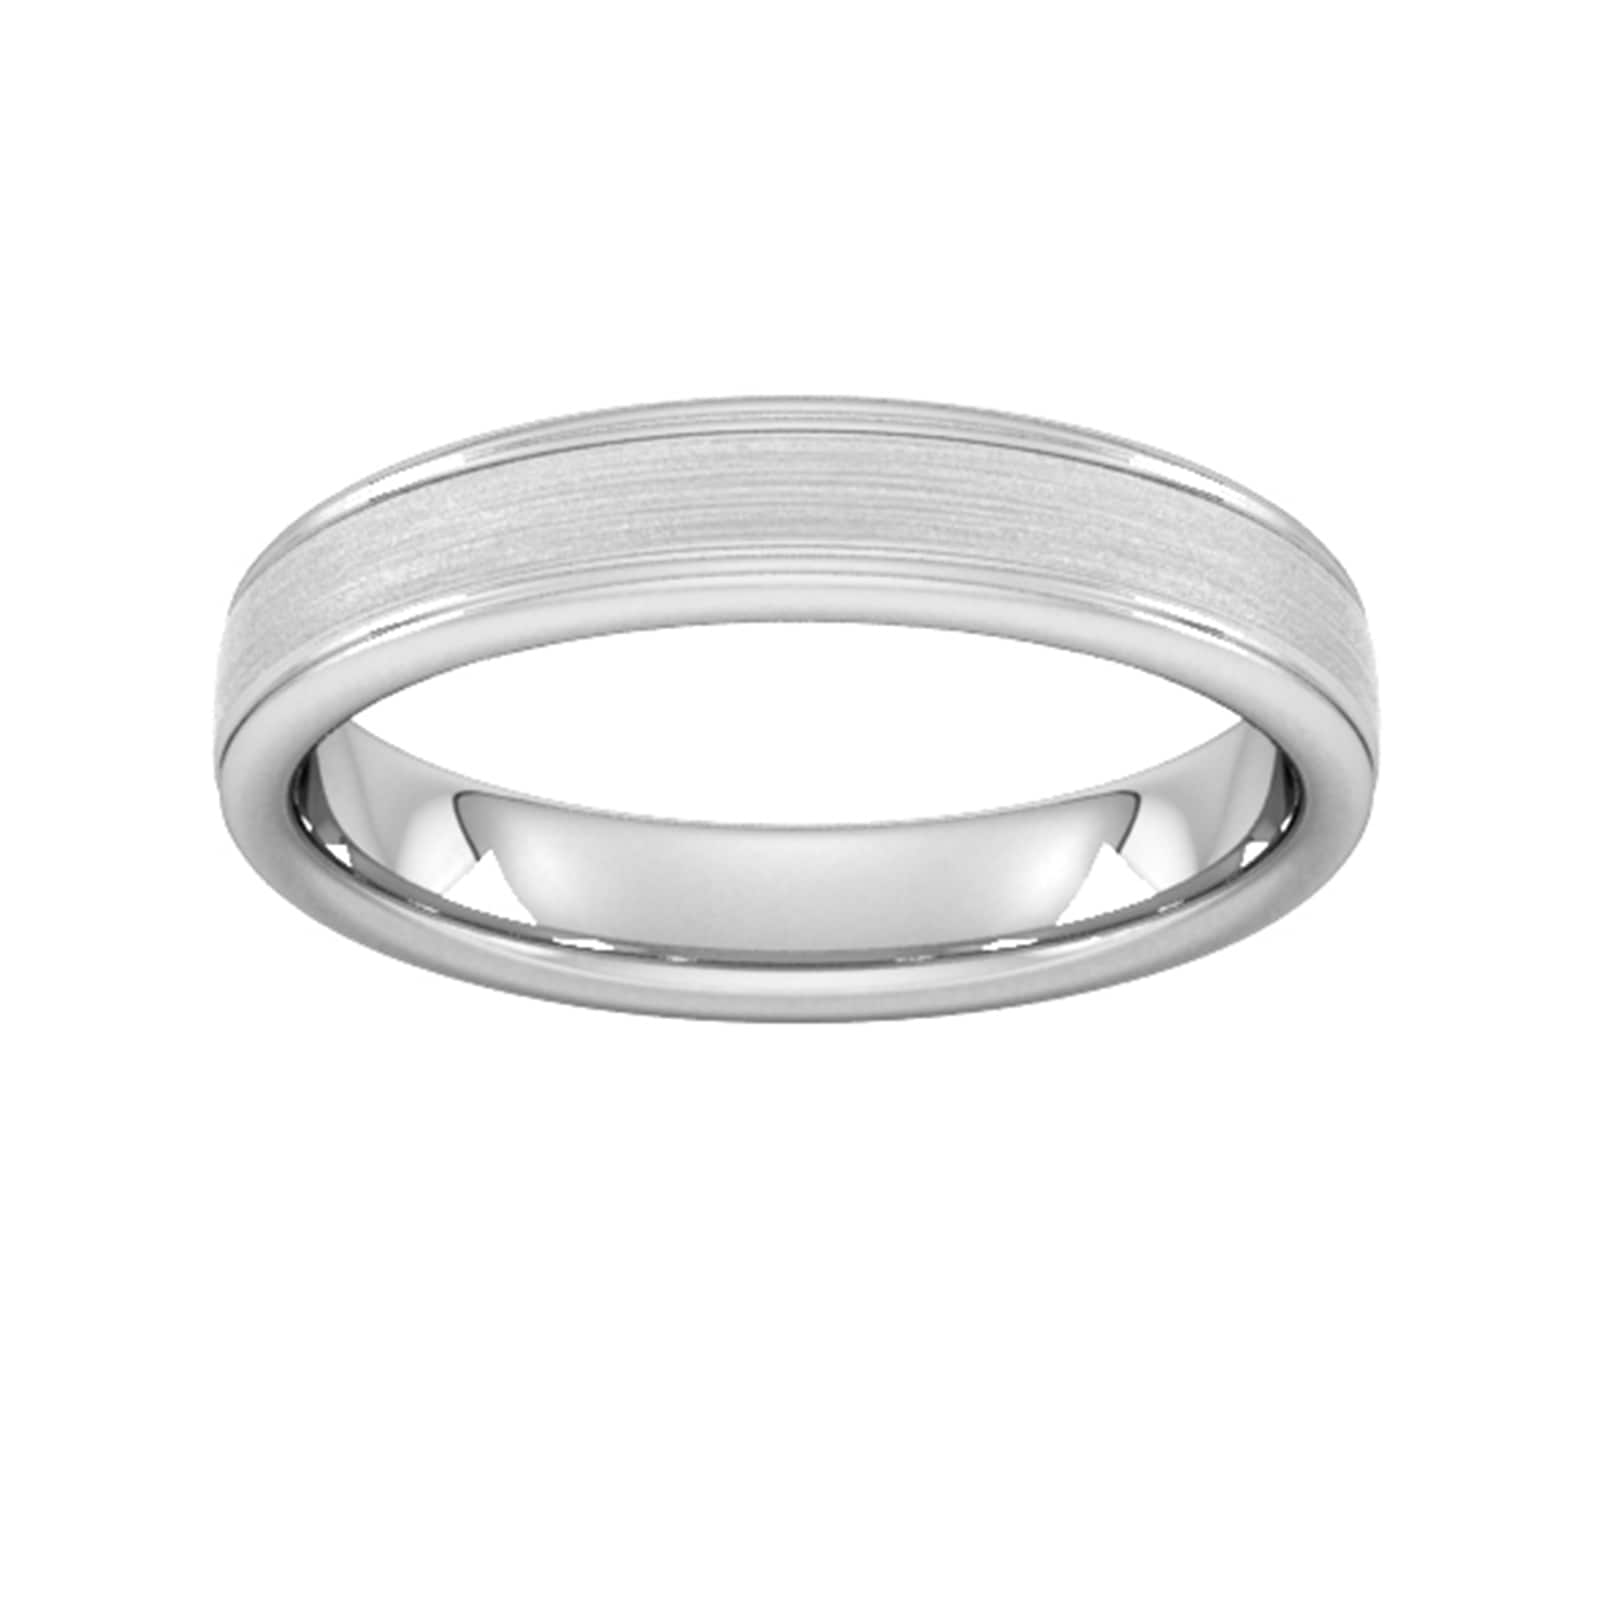 4mm D Shape Standard Matt Centre With Grooves Wedding Ring In 9 Carat White Gold - Ring Size M